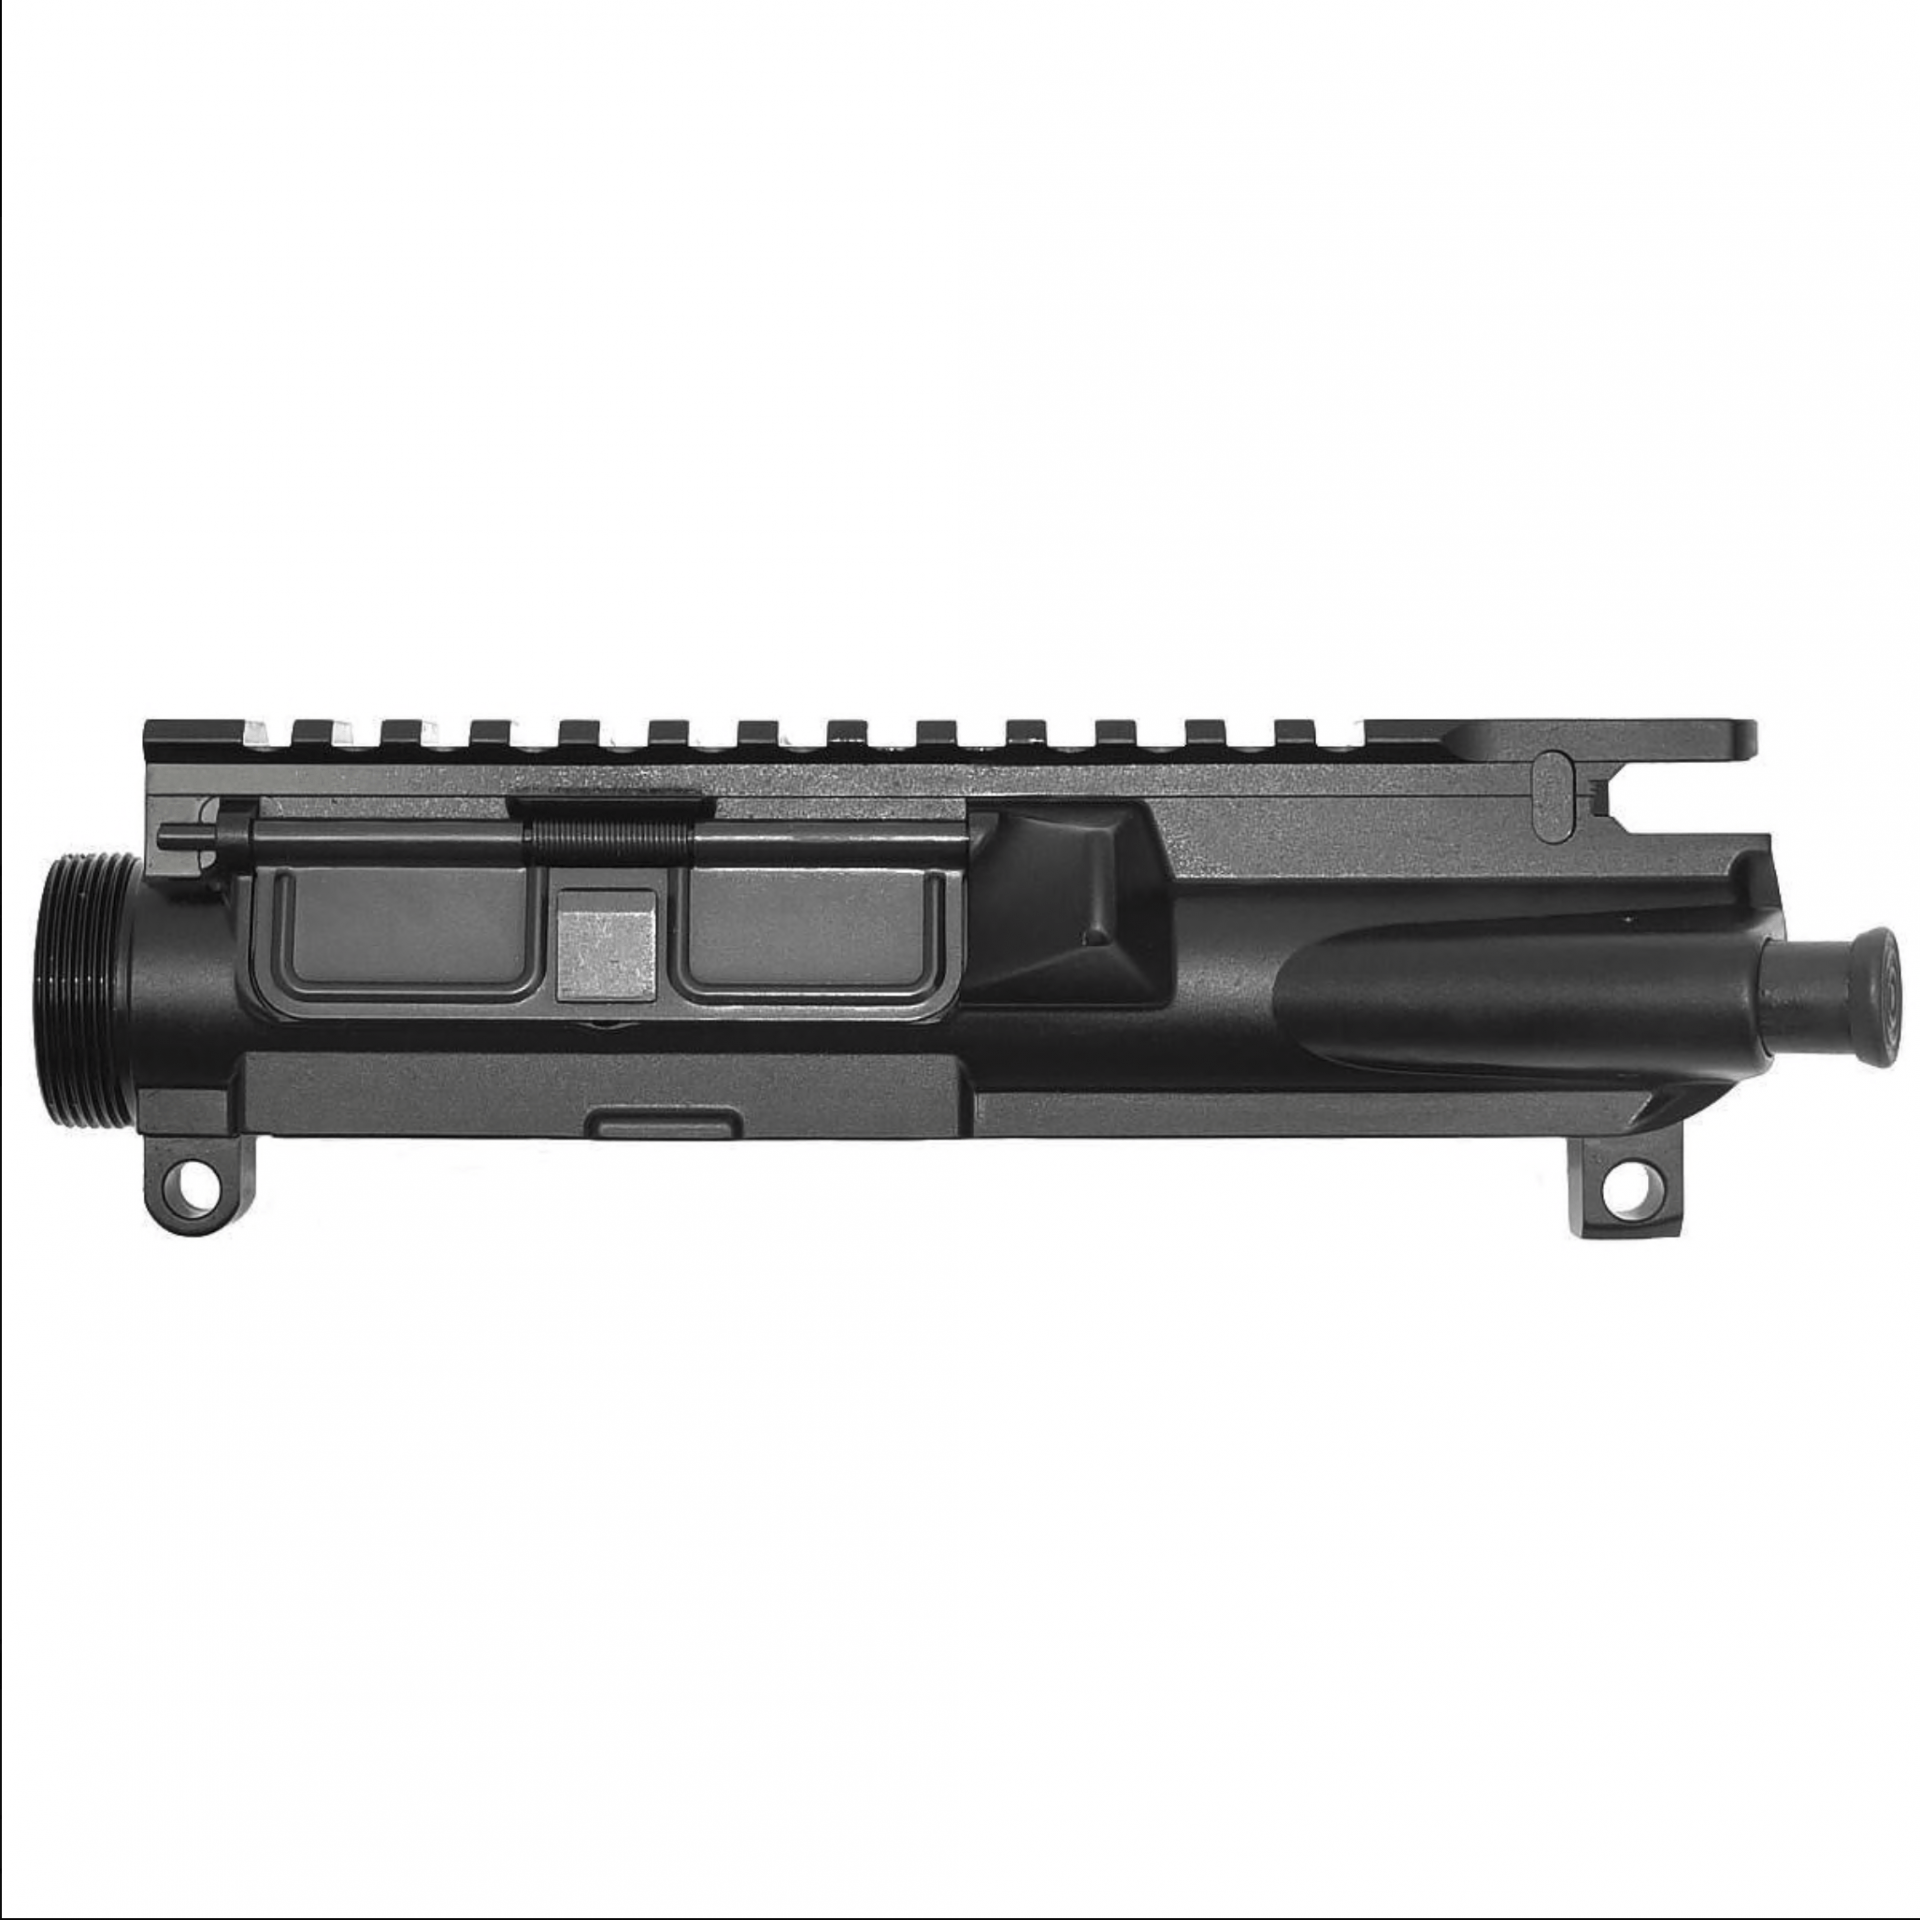 Stag Arms A3 Flattop Left-Handed Upper Receiver Assembly Black from $109.95 (Free S/H over $150)